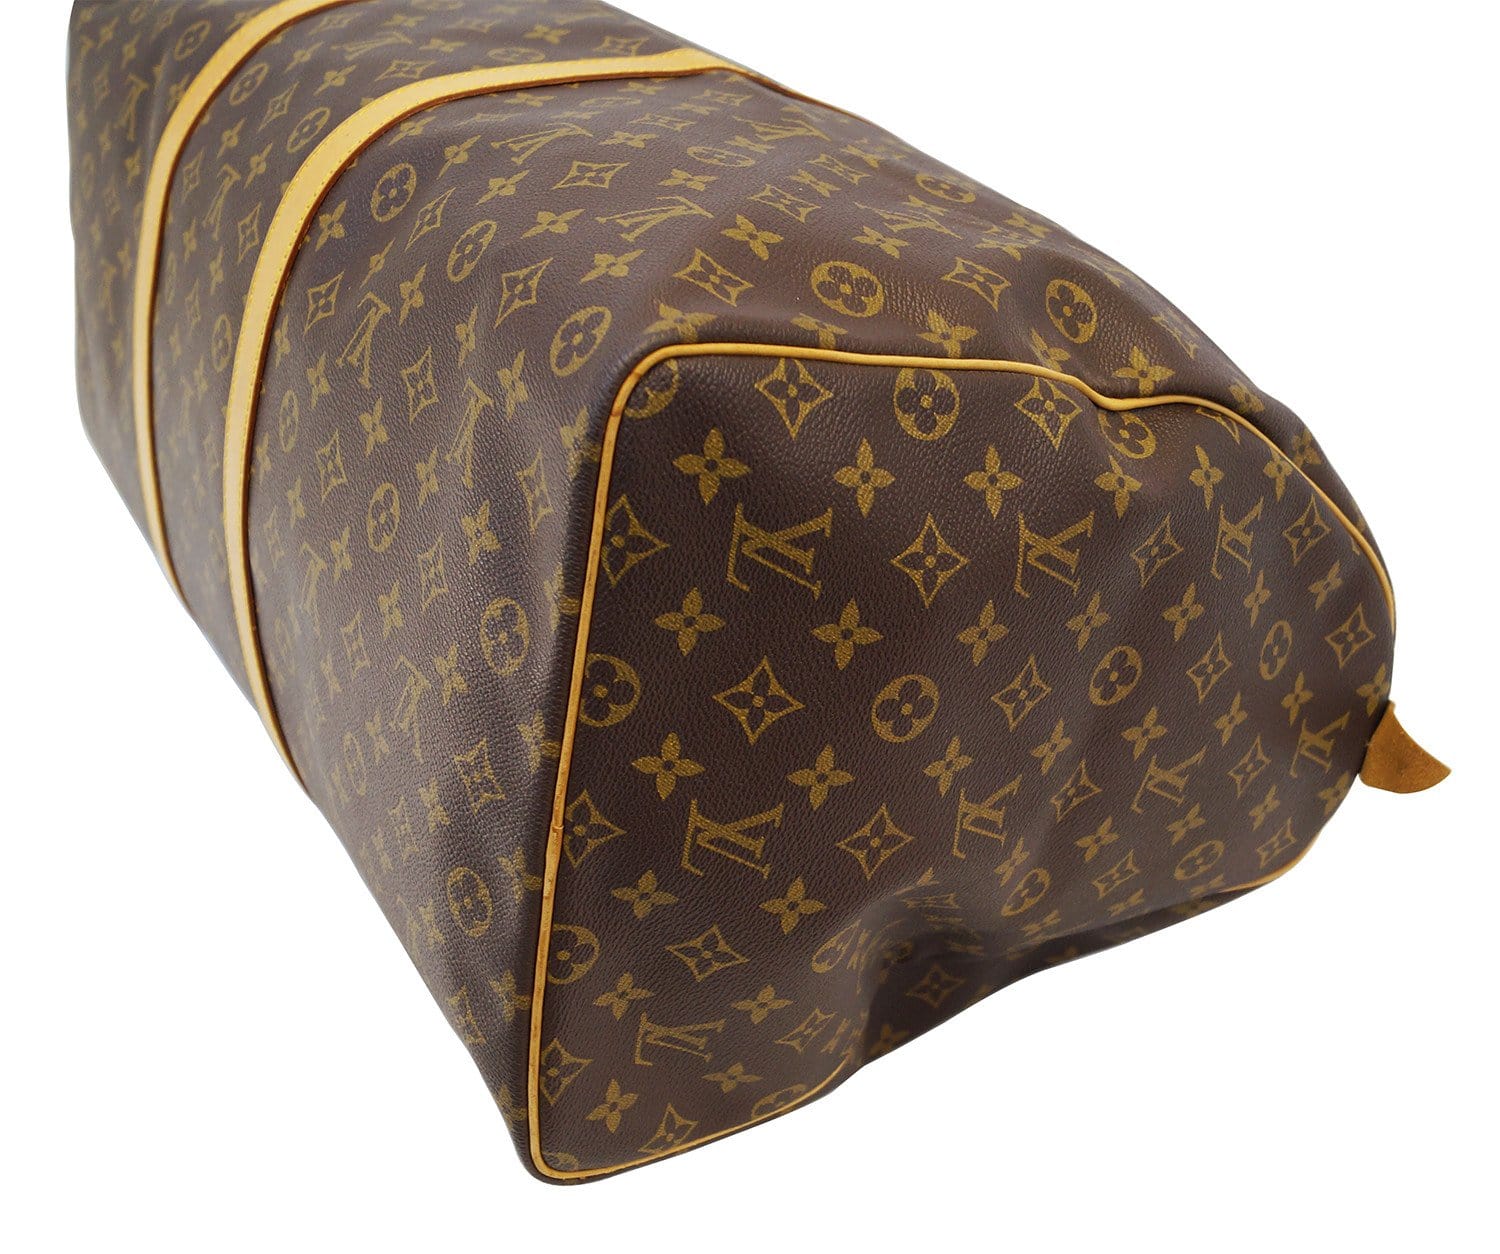 Vintage(60's/70's) Louis Vuitton Monogram Triangle Bag for Sale in